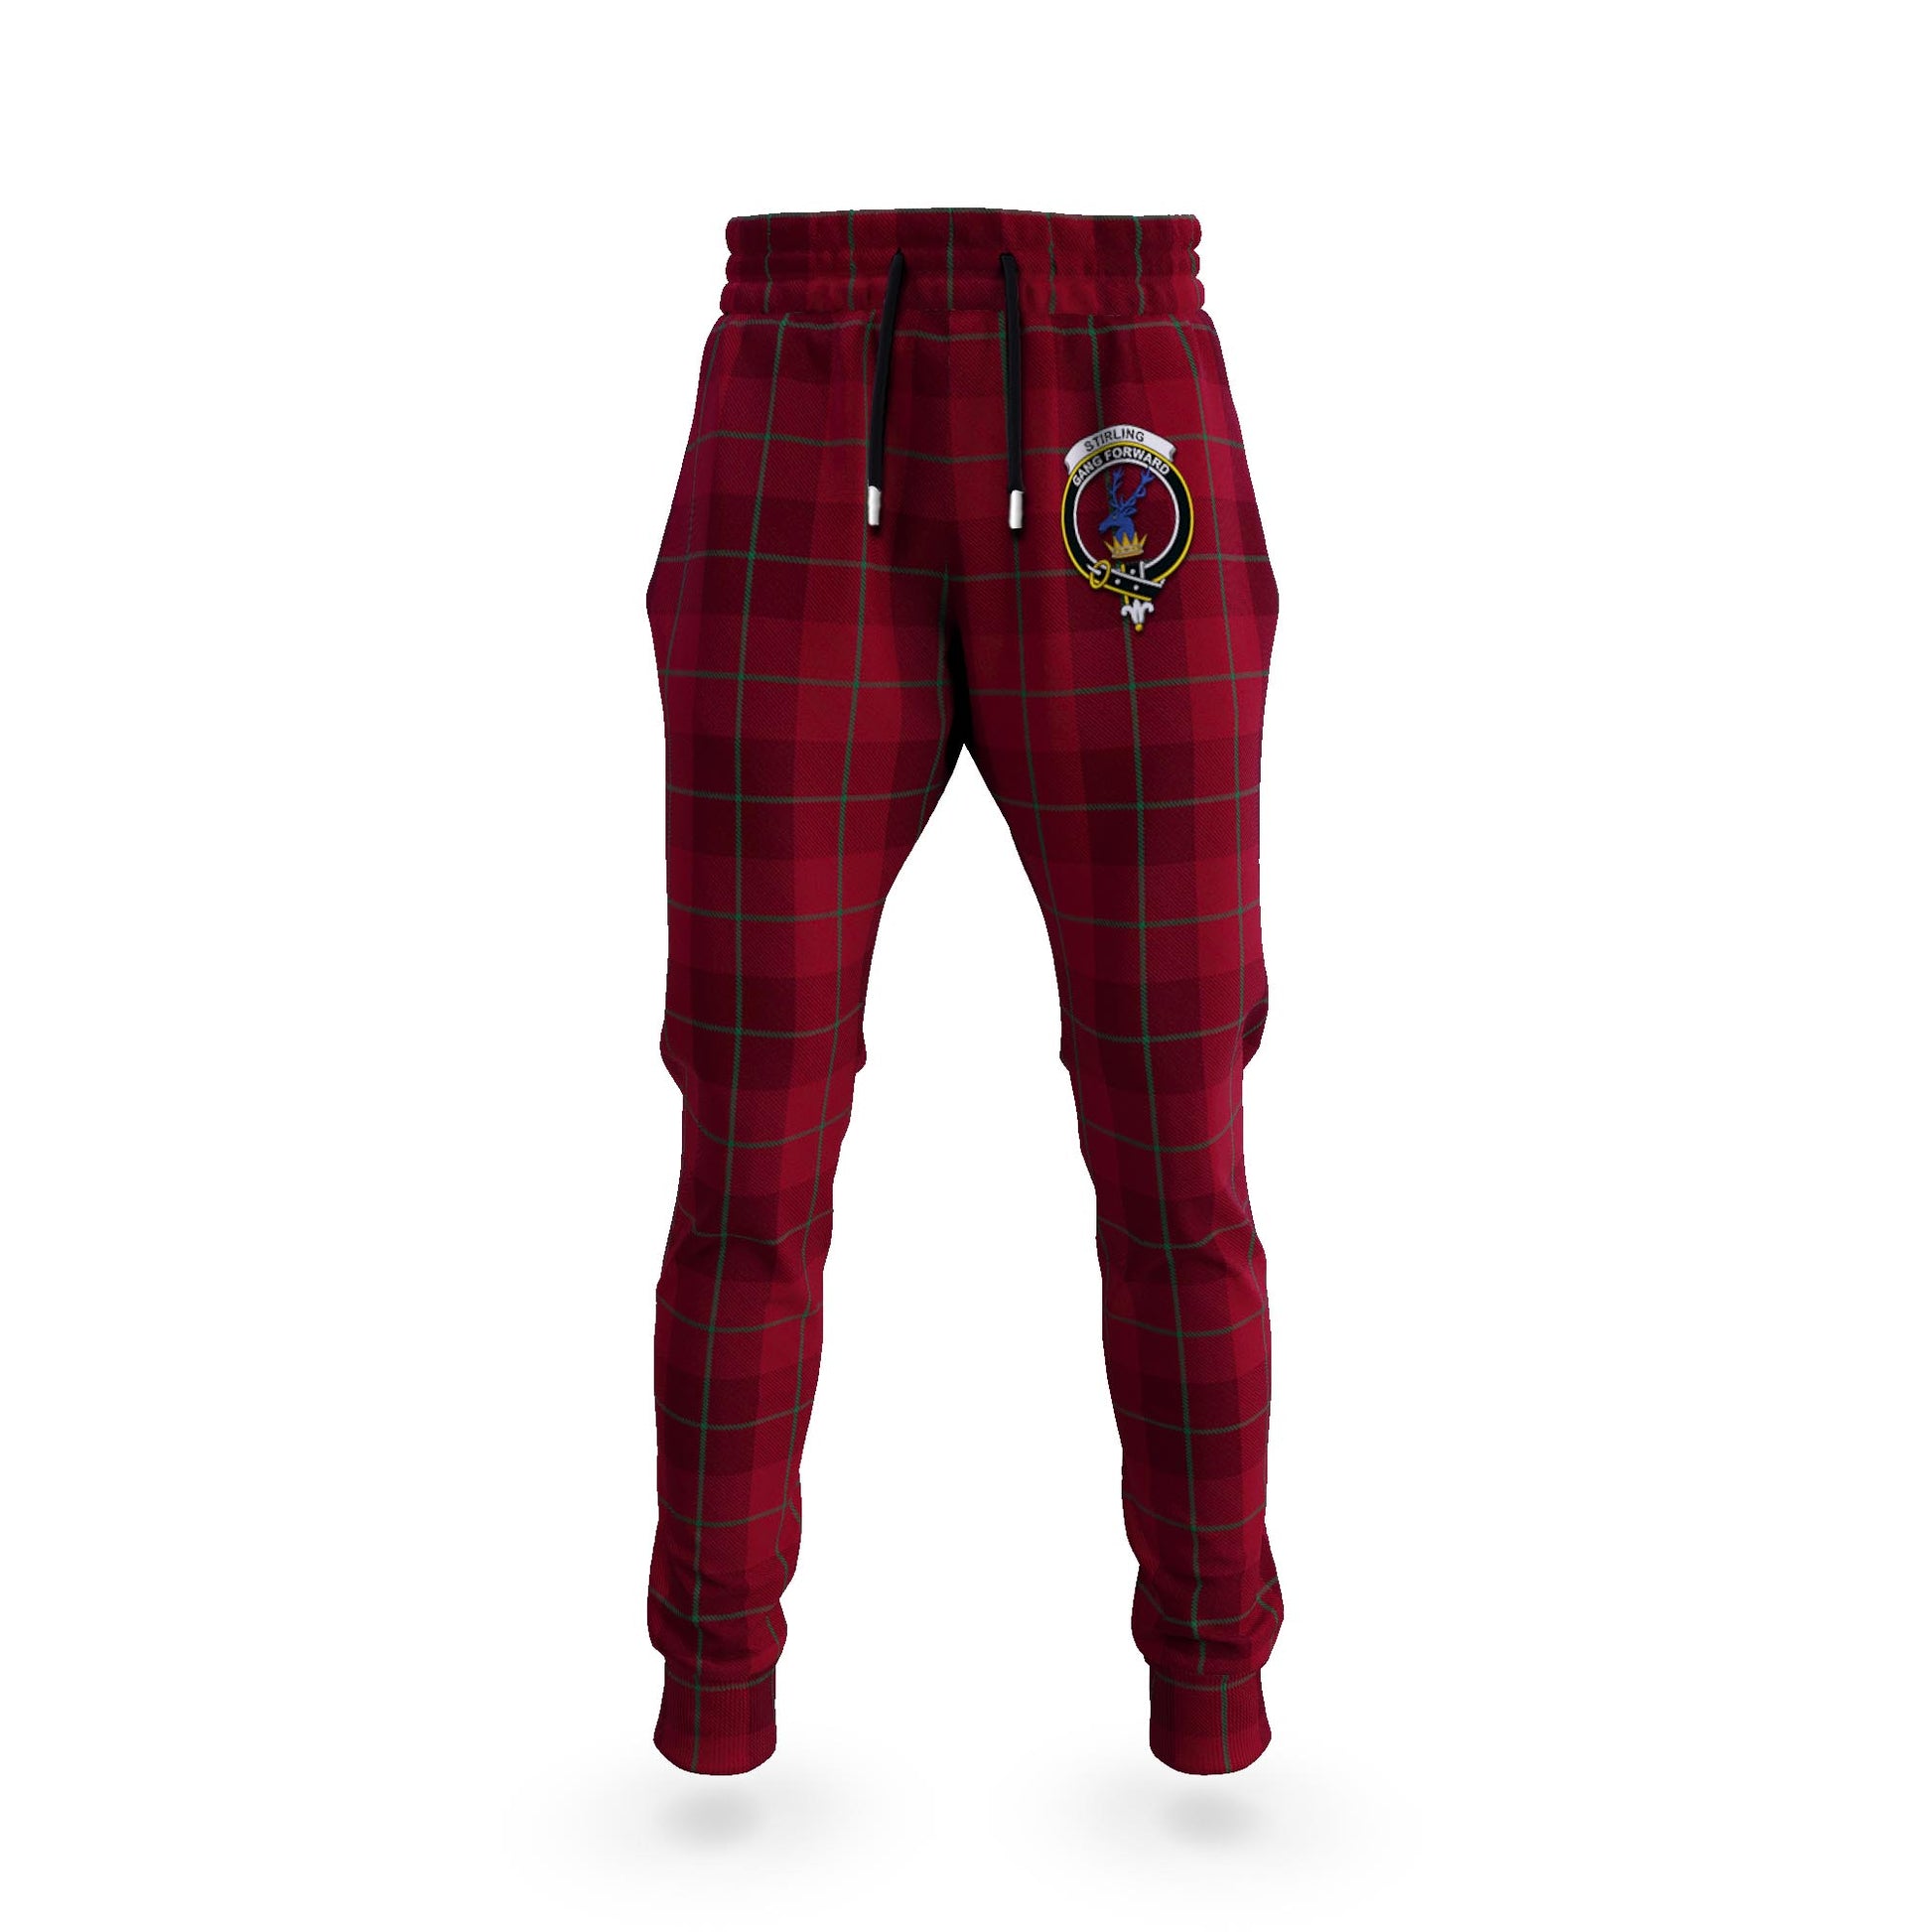 Stirling of Keir Tartan Joggers Pants with Family Crest - Tartanvibesclothing Shop